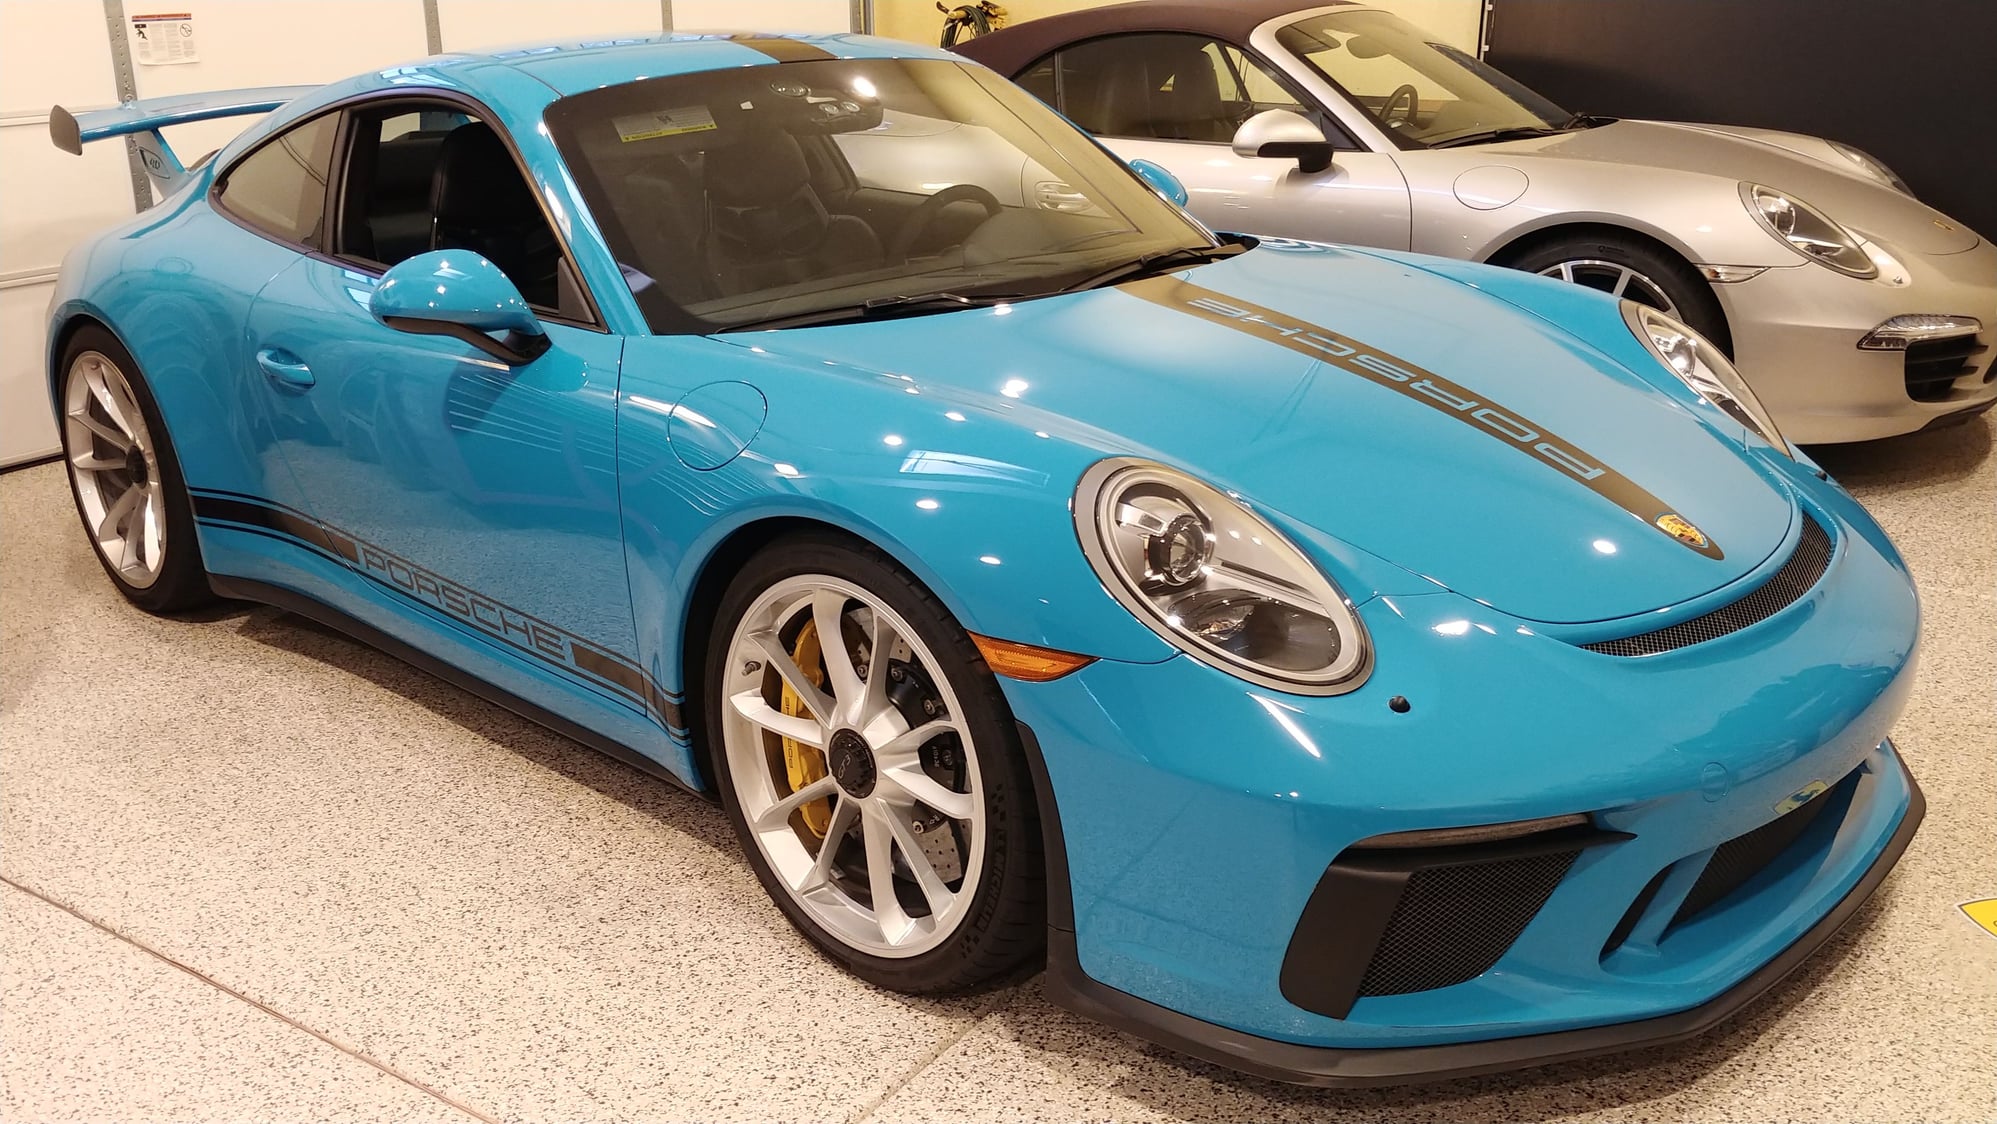 2018 Porsche GT3 - 2018 GT3 Manual in Miami Blue - Used - VIN WP0AC2A92JS176011 - 1,025 Miles - 6 cyl - 2WD - Manual - Coupe - Blue - Rowland Heights, CA 91748, United States